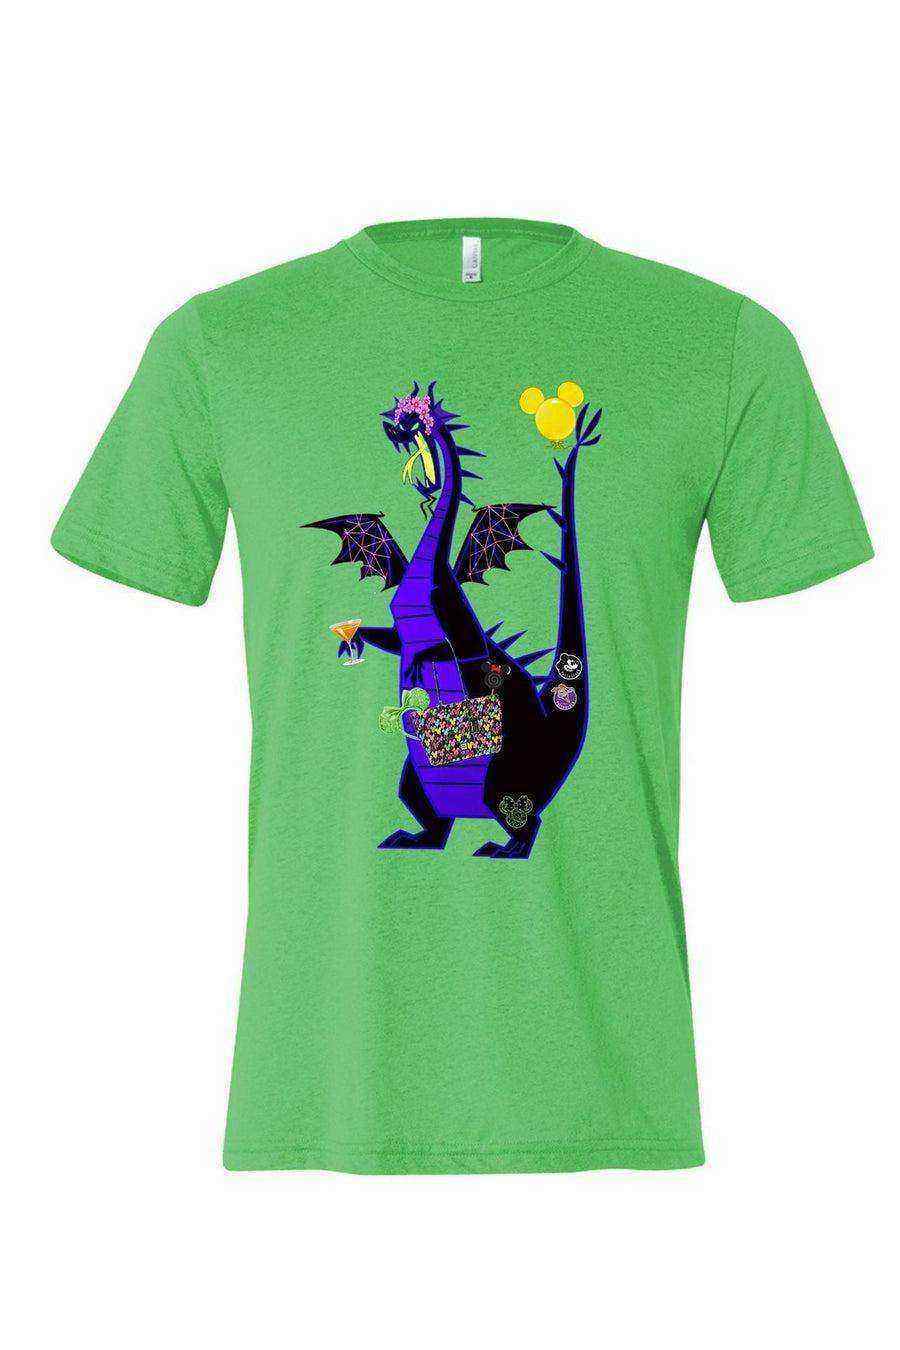 Youth | Park Hopping Dragon Shirt | Maleficent Dragon - Dylan's Tees